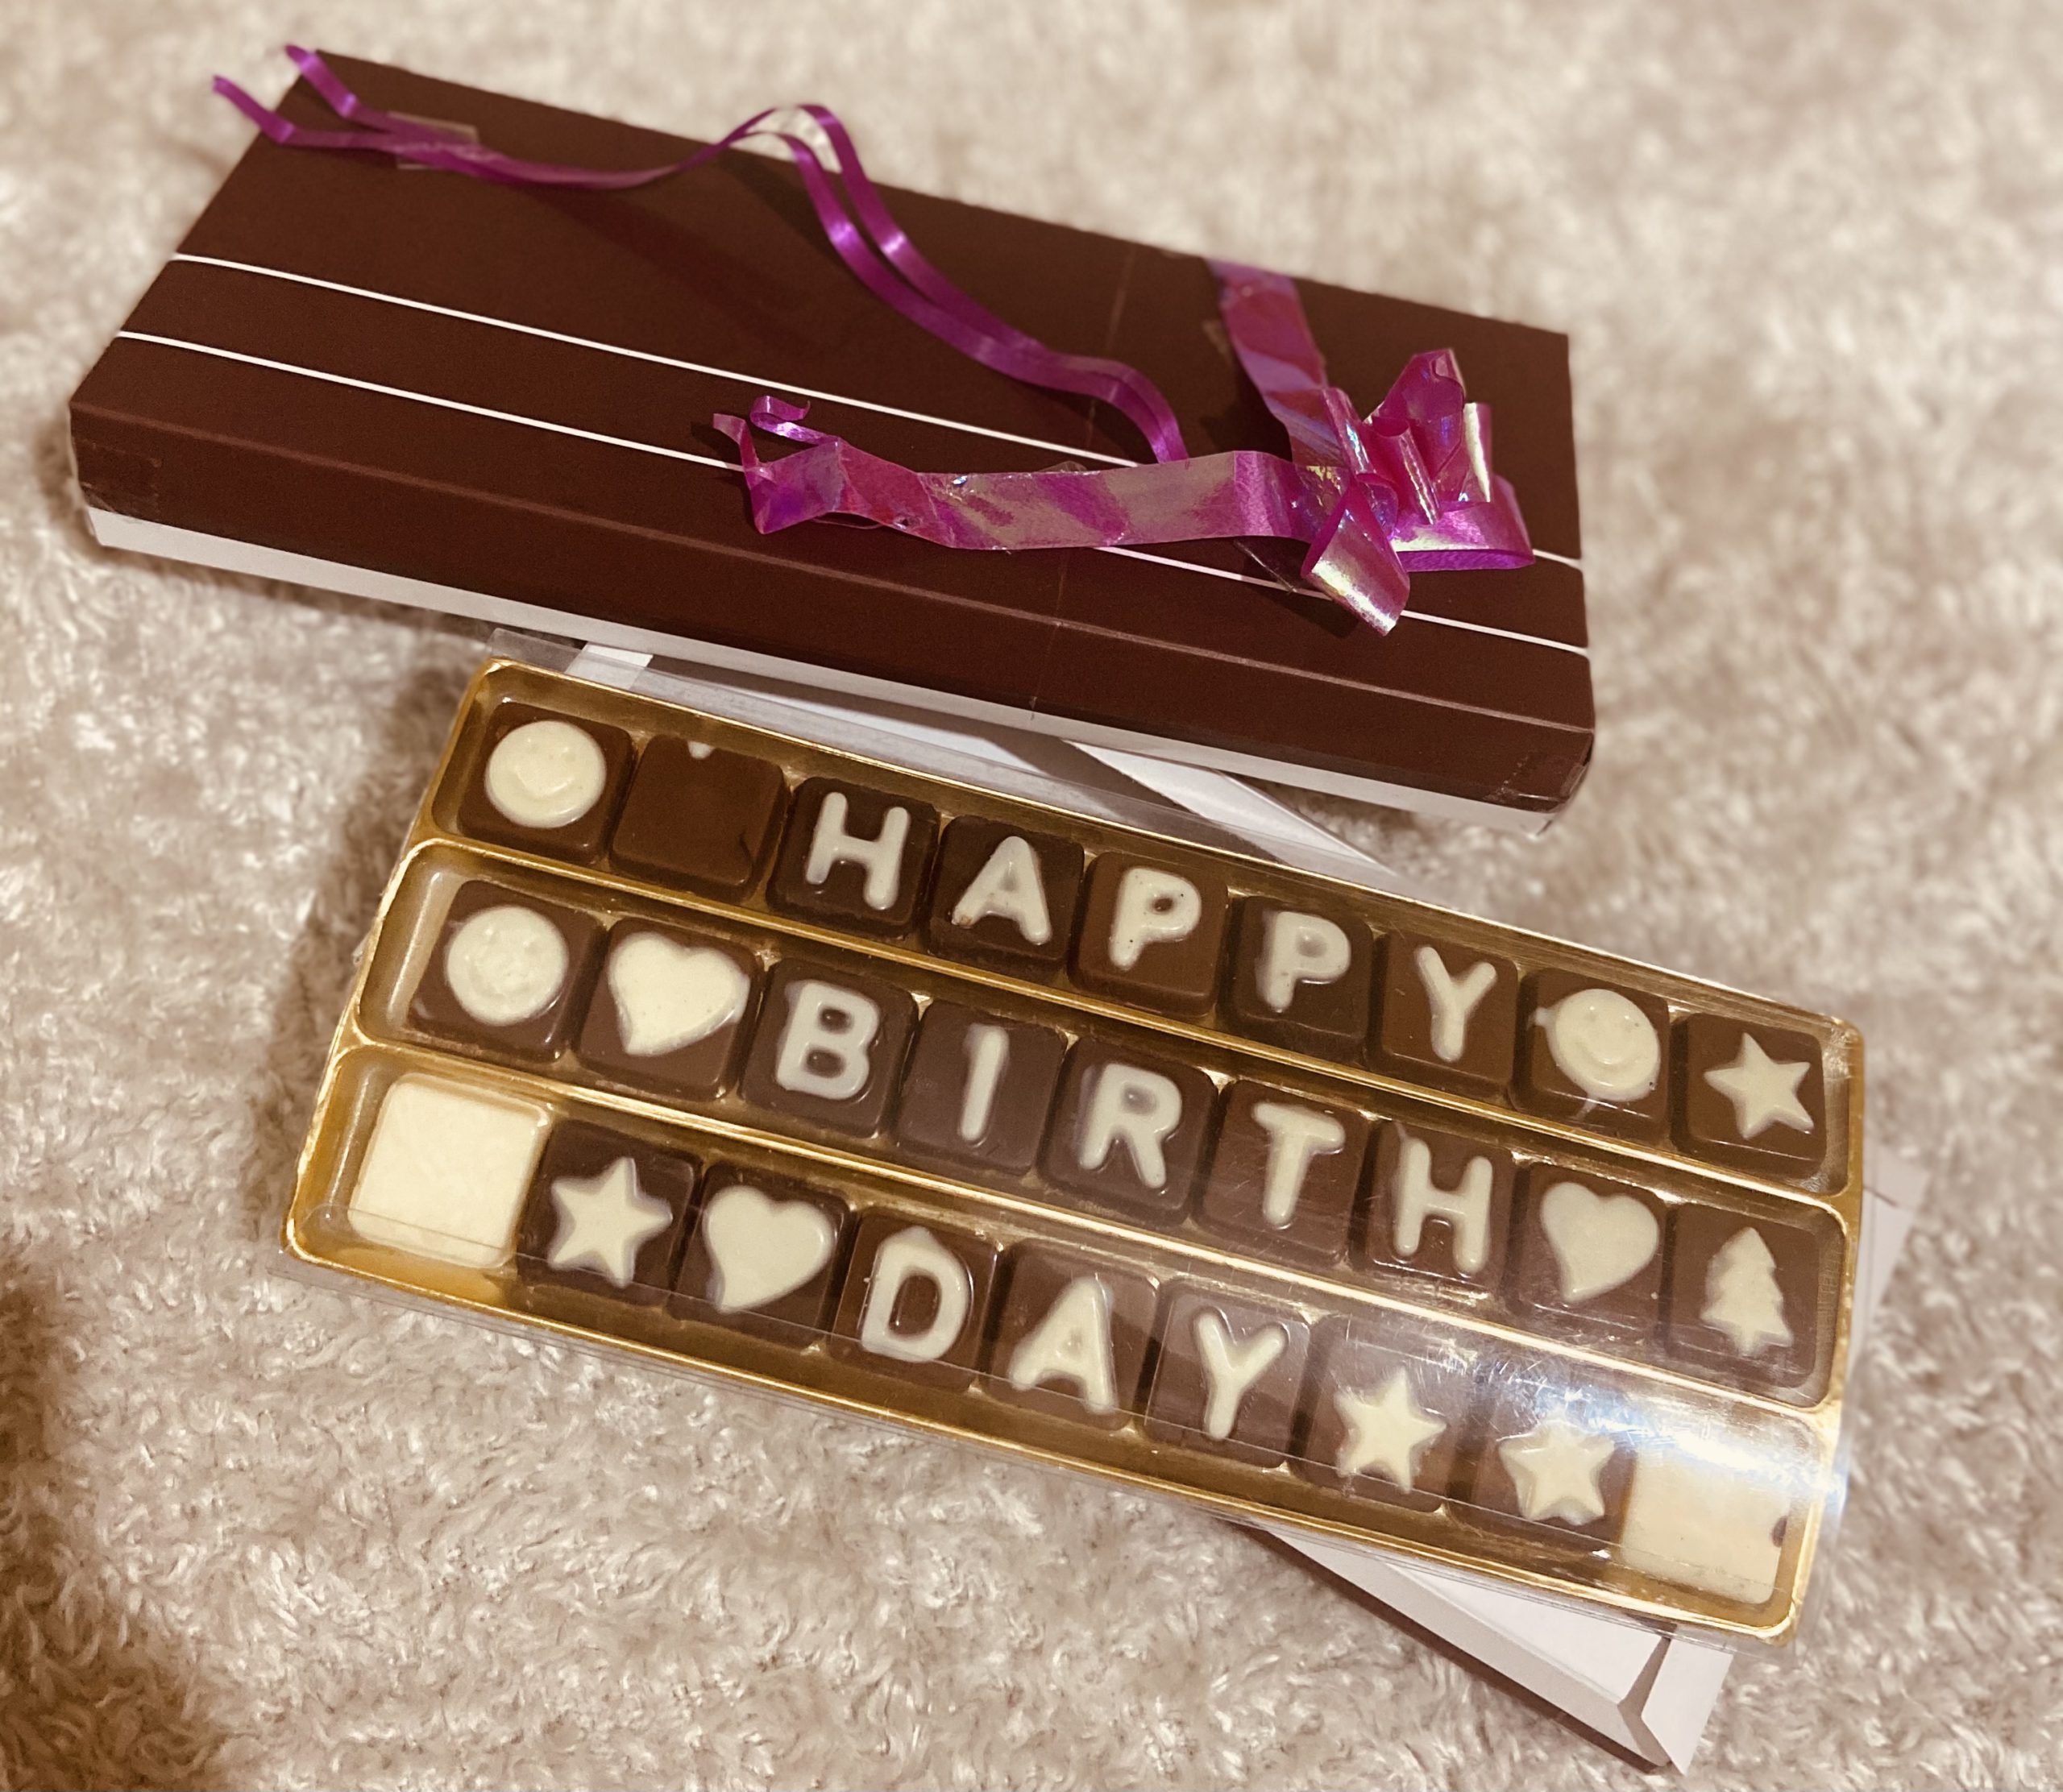 Chocolate Message Box Designs, Images, Price Near Me